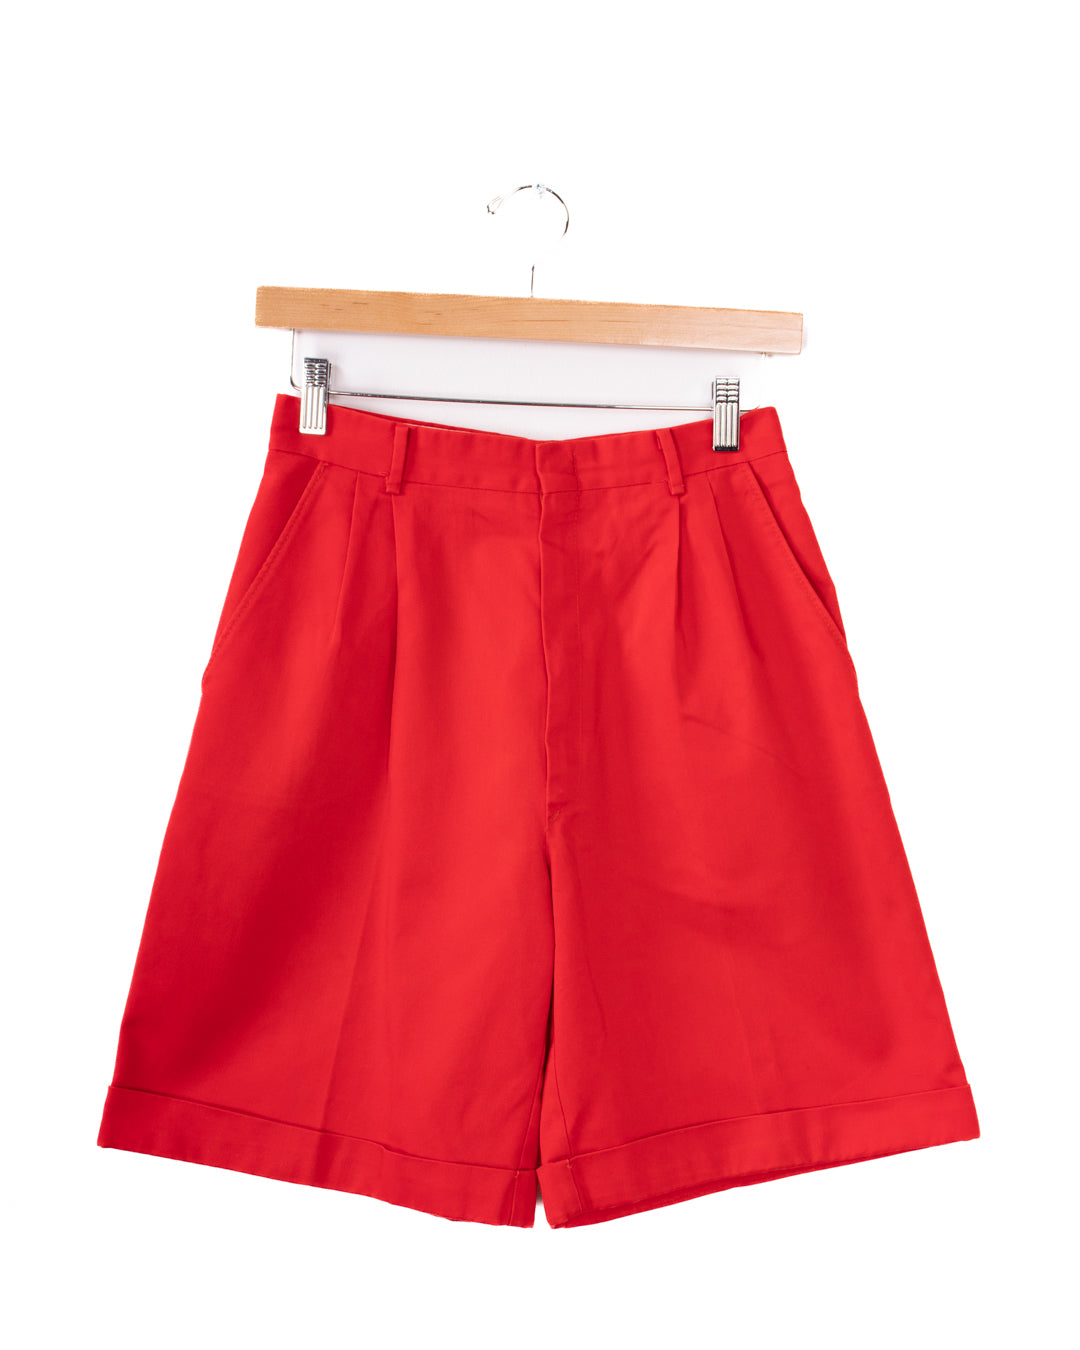 90s Spinnaker Sport Pleated Red Shorts